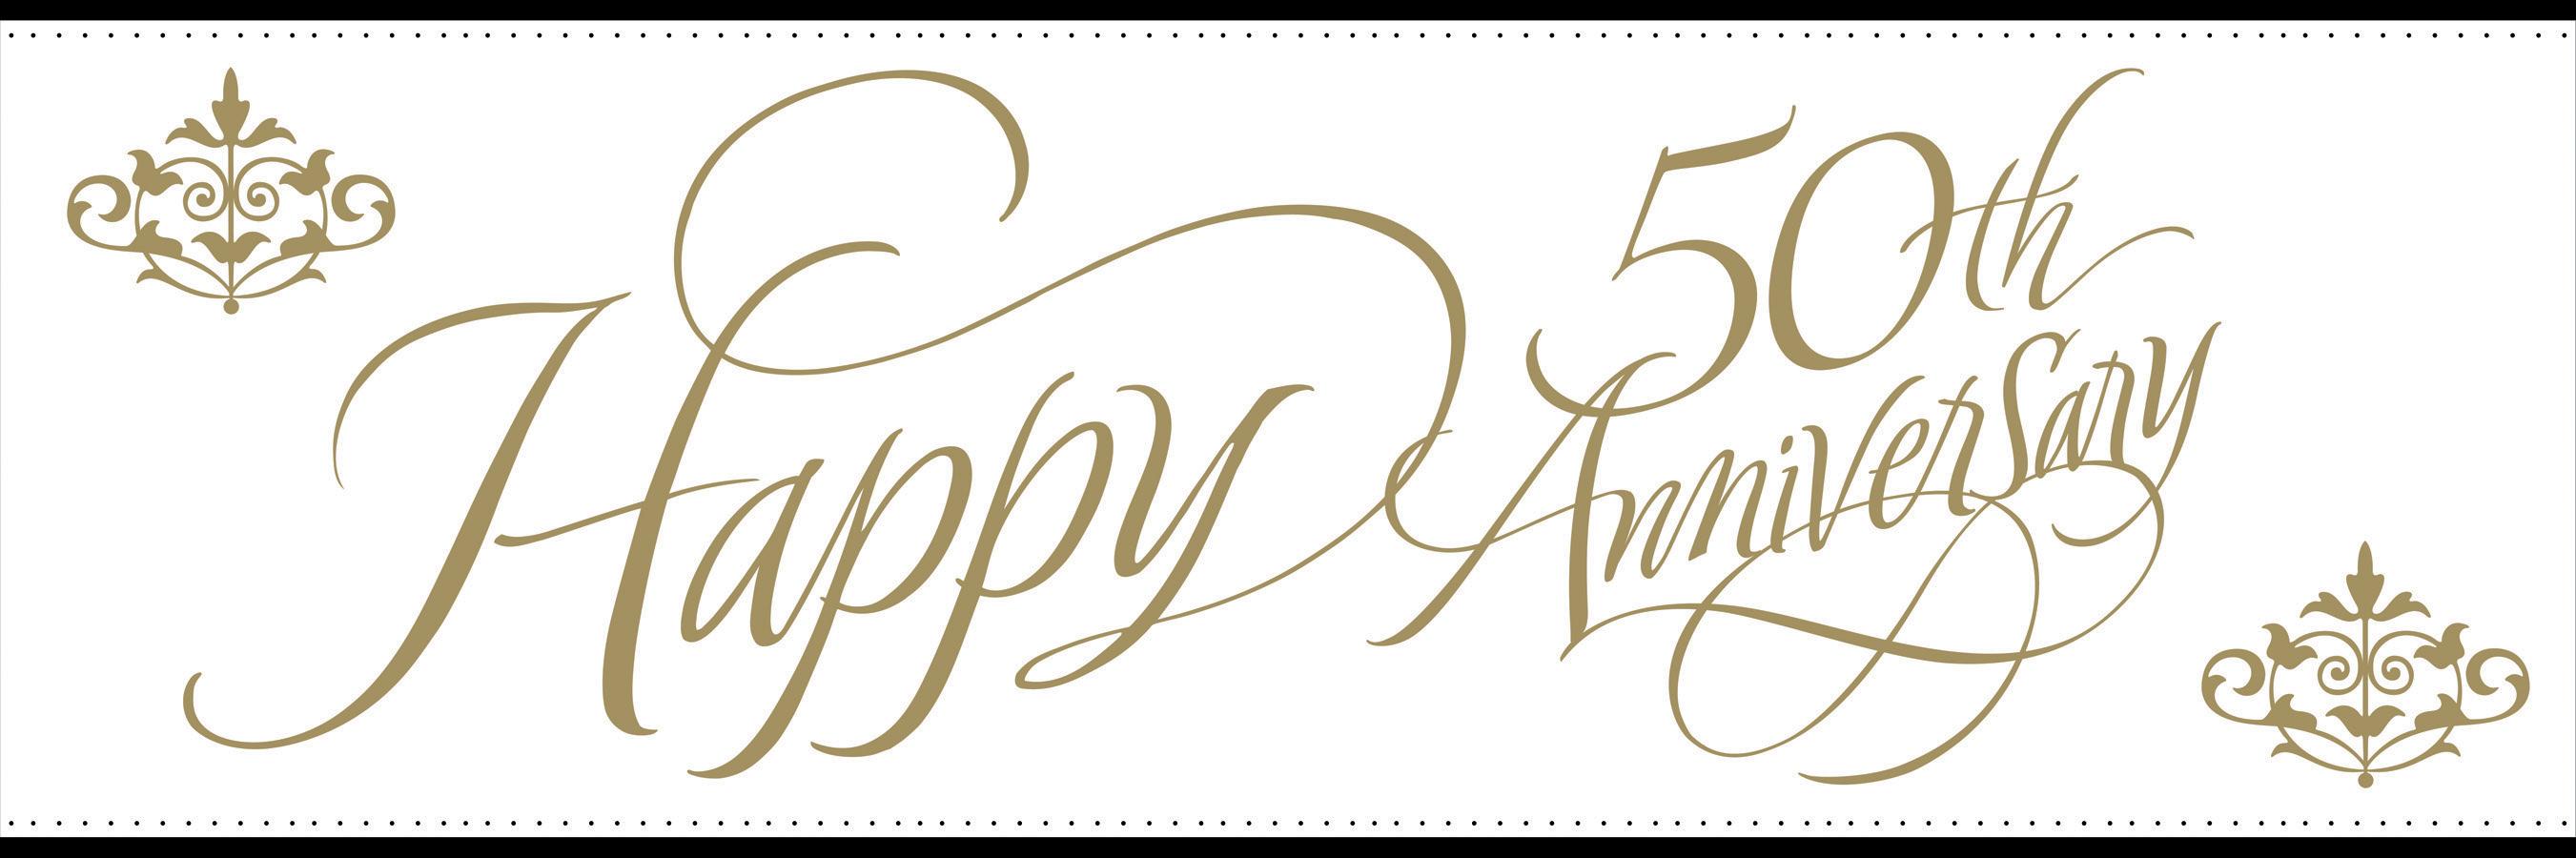 50Th Wedding Anniversary Open House For Jim And Sandy Ryan In Family Life Center - 50Th Wedding Anniversary, Transparent background PNG HD thumbnail